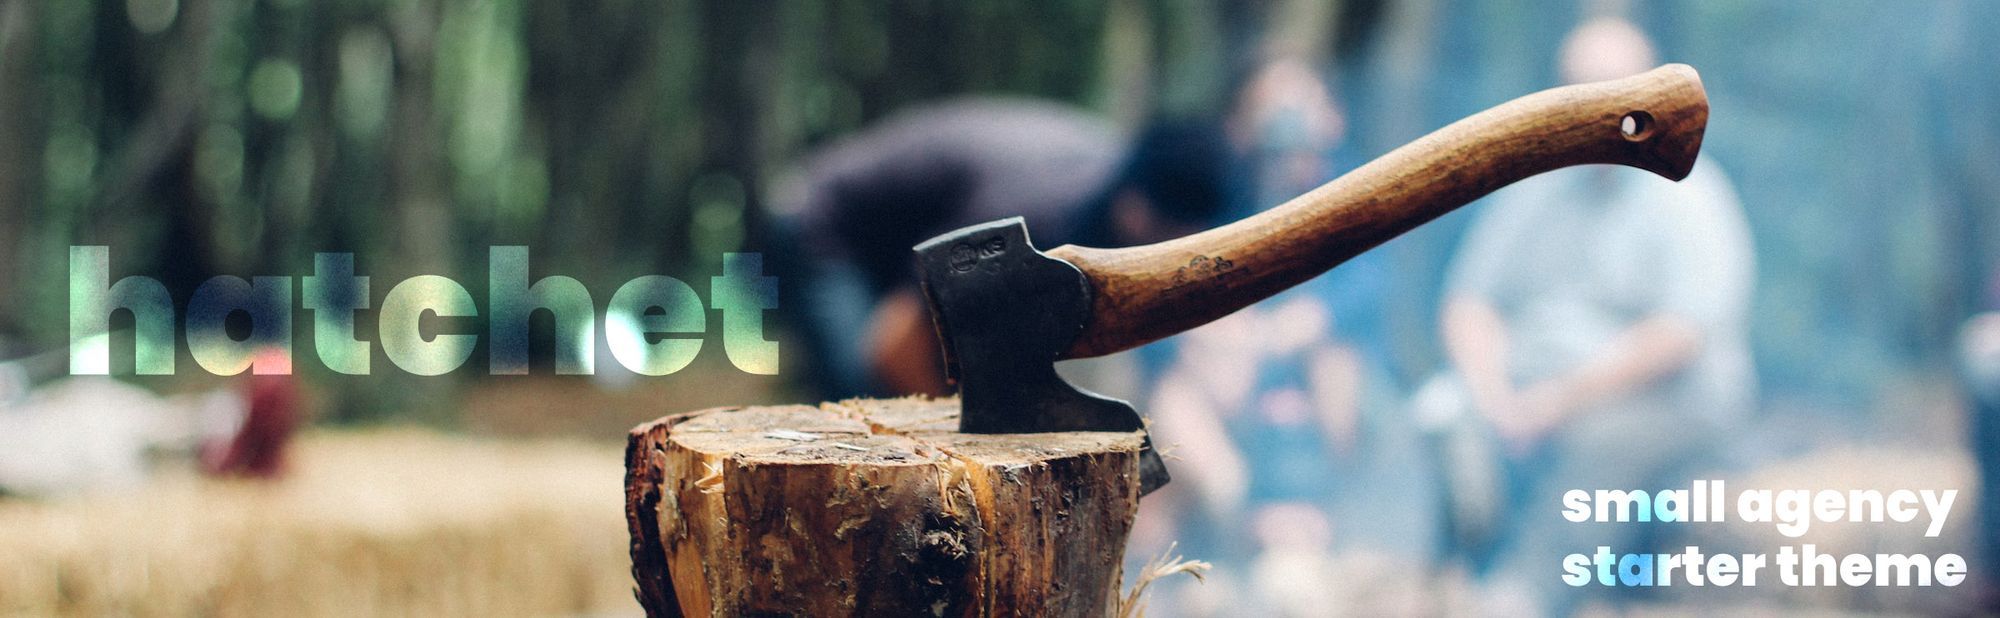 Hatchet: A WP theme for small agencies